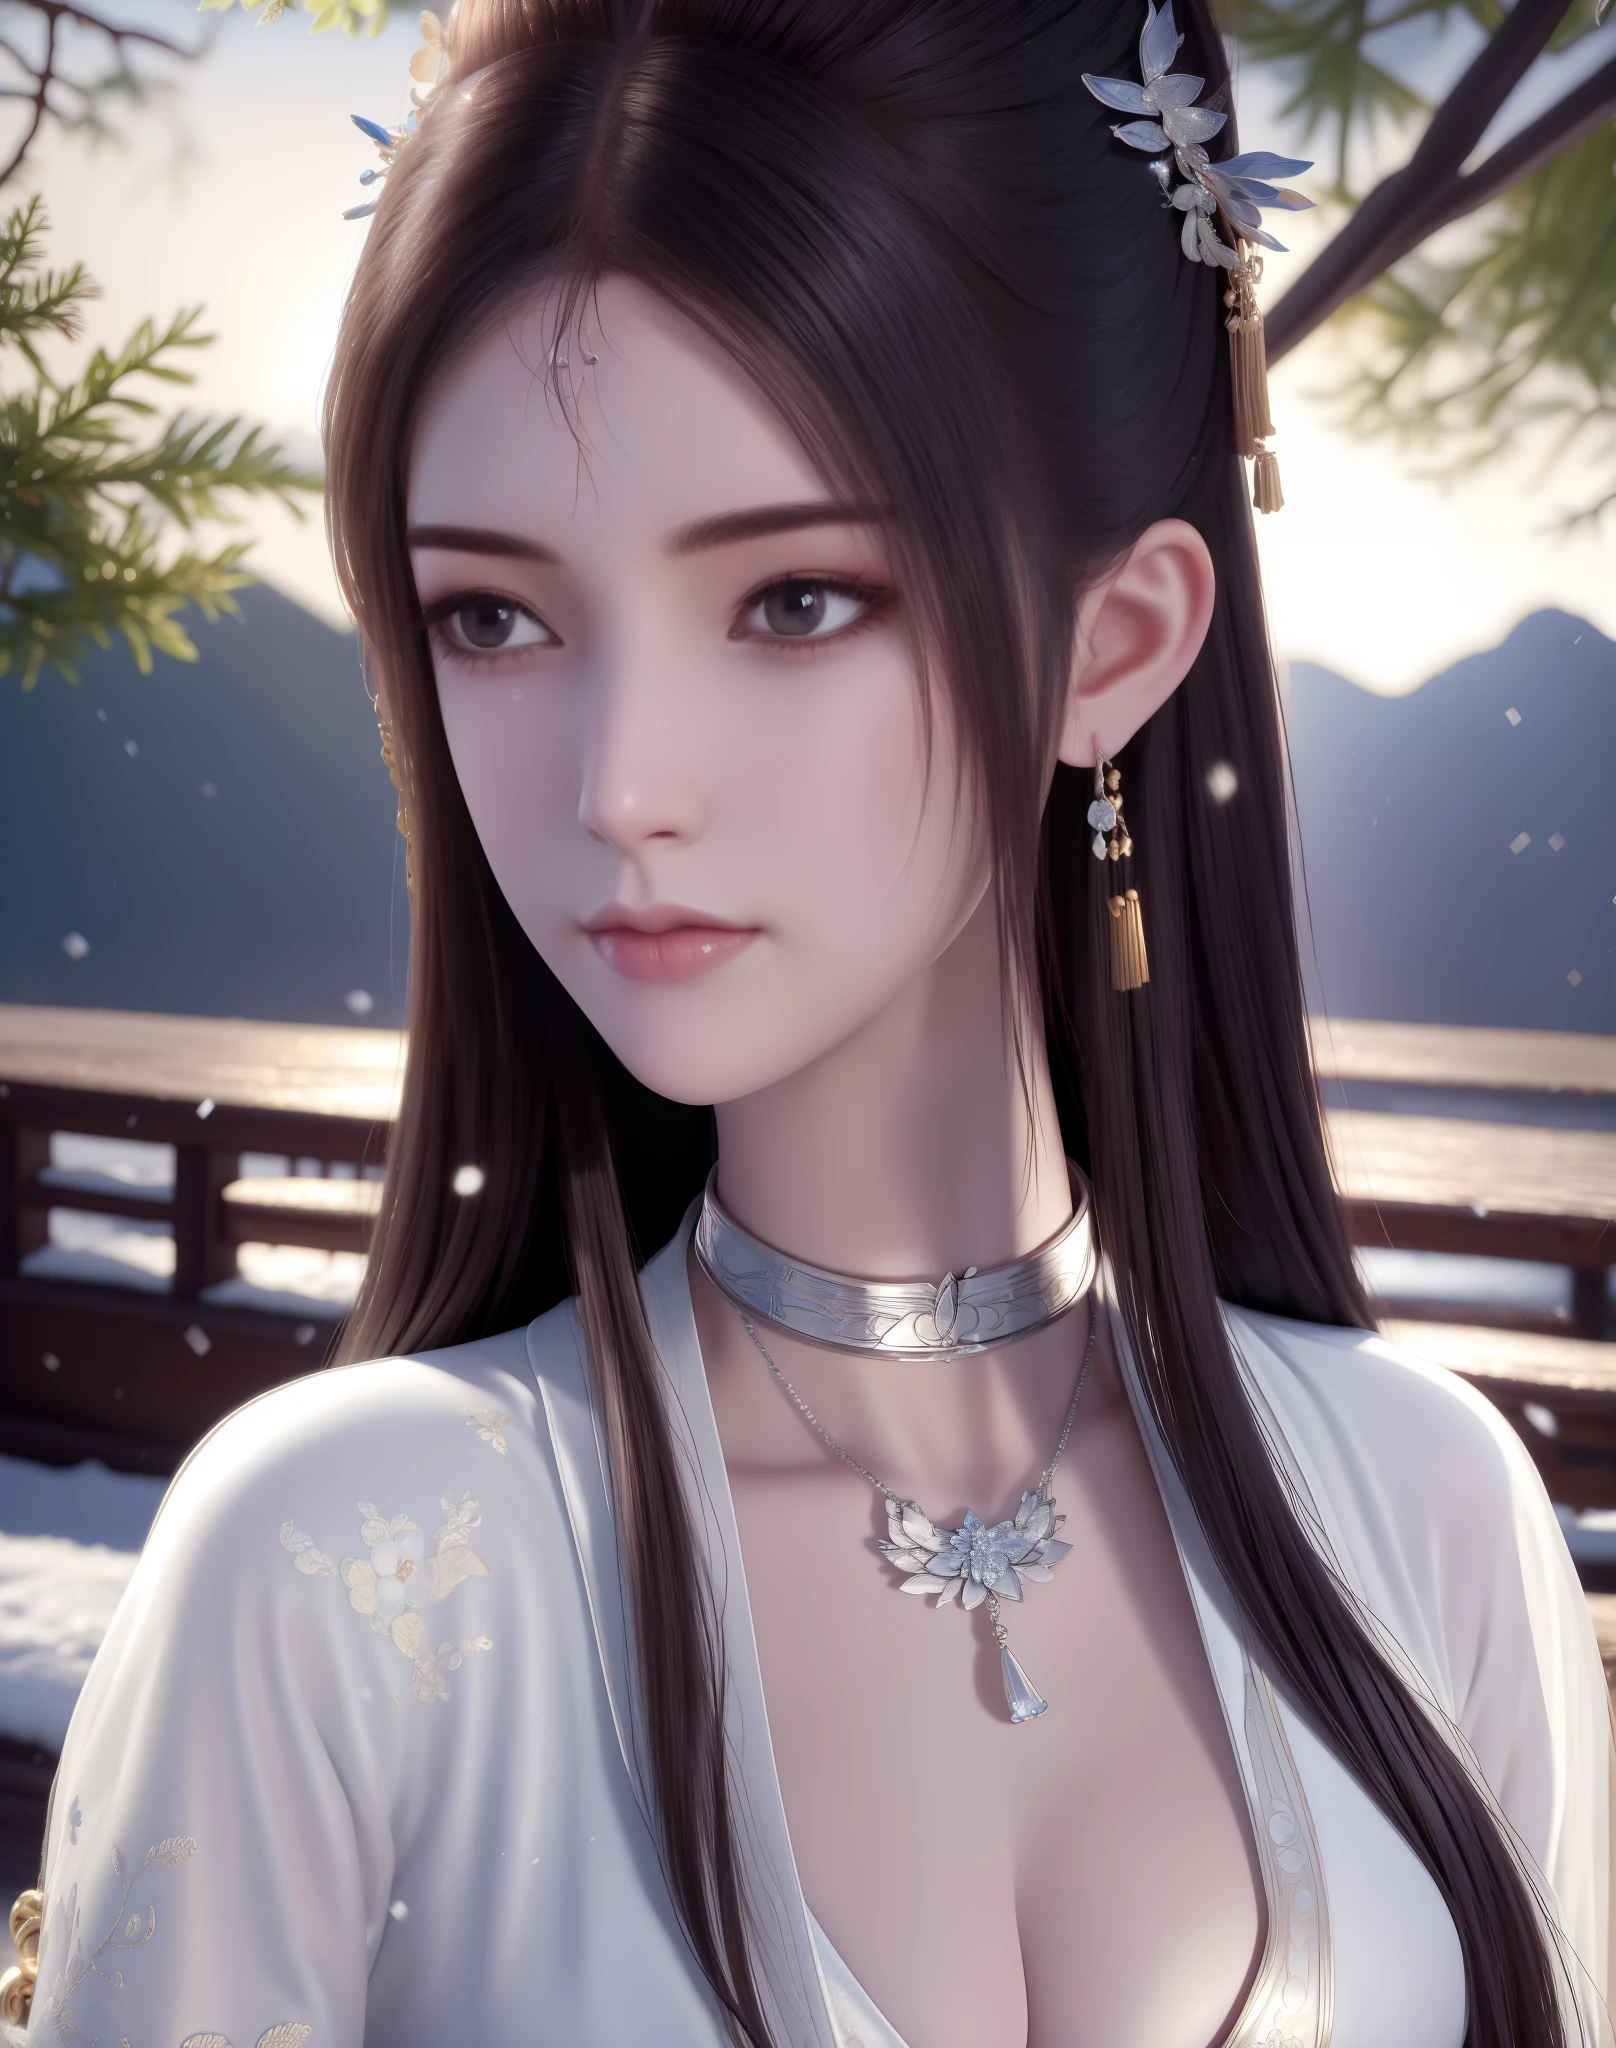 best qualtiy， tmasterpiece， A high resolution， （（（1girl）））， Ancient Chinese battlefield background，Metal armor， metalcollar， hair adornments， choker necklace， jewely， beautiful  face， upon_body， Tyndall effect， realisticlying， dark studio， edge lit， twotonelighting， （highdetailskin：1.2）， 8K  UHD， digital SLR camera， gentle illumination， high high quality， Volumetriclighting， Frankness， photore， A high resolution， 4k， 8k， bokeh，Silver-white bikini armor，Embroidered phoenix on the chest，metal breastplate，tight-fitting，pony tails，Bare arms，Exposing the abdomen，arma，Short wrist guards，stocklings